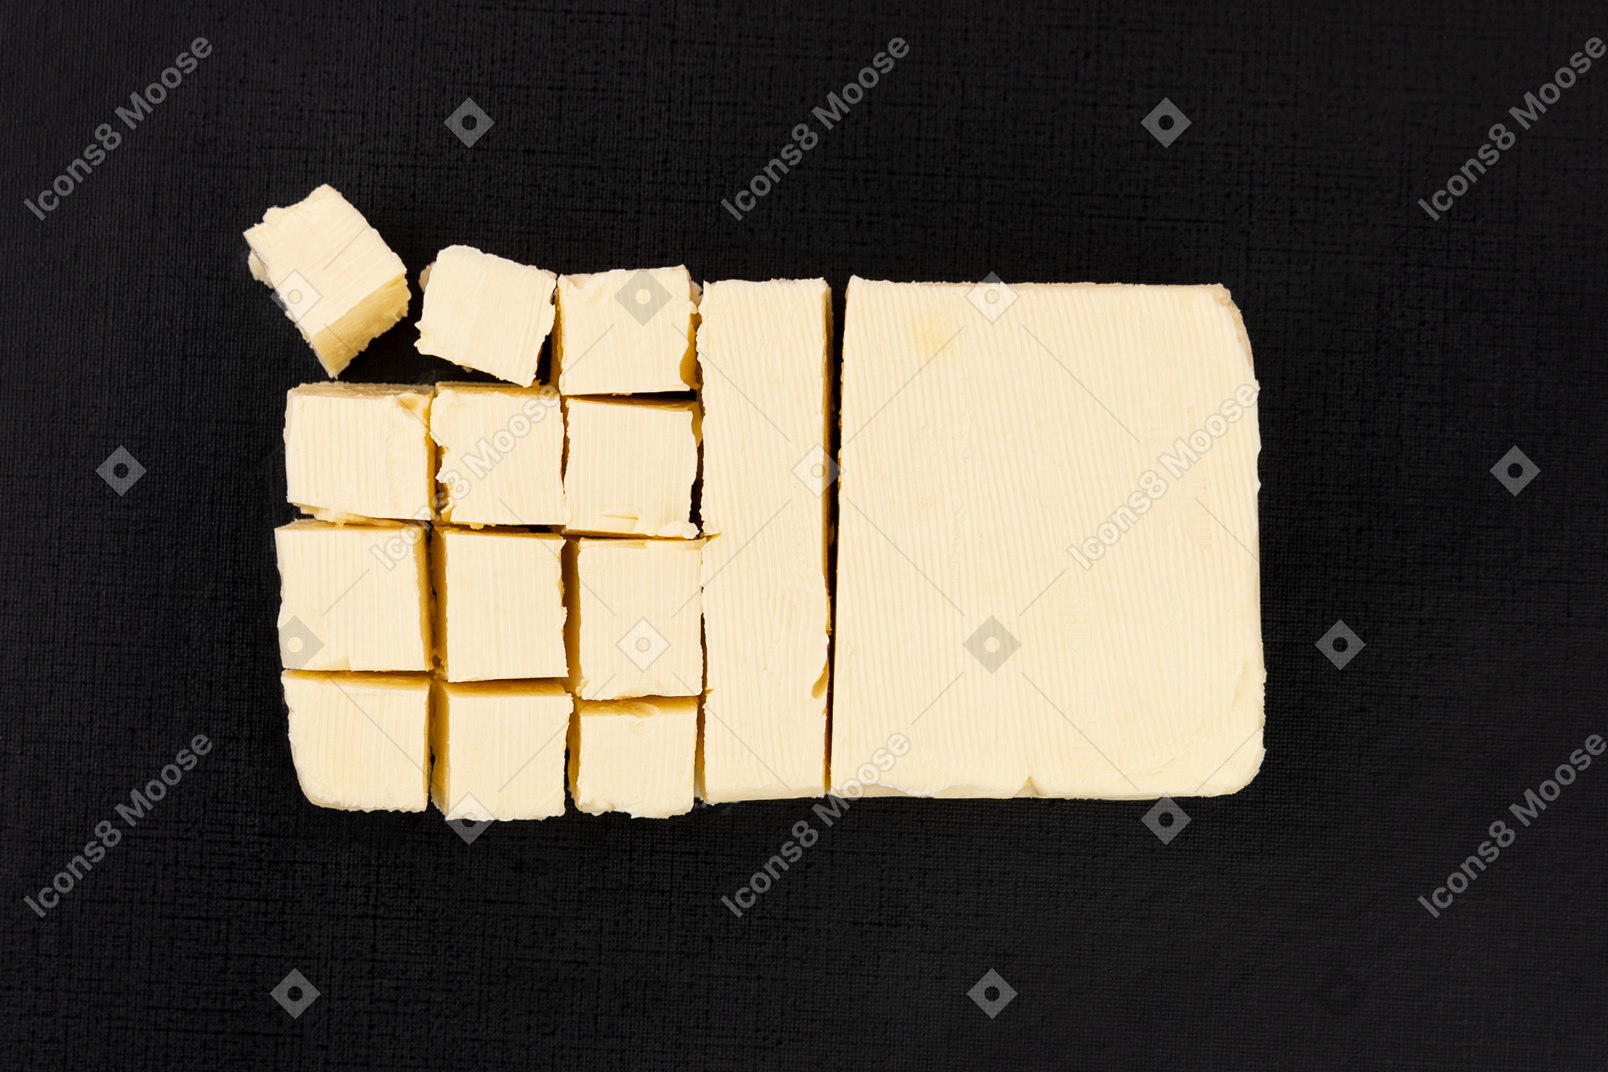 Cut block of butter on black background